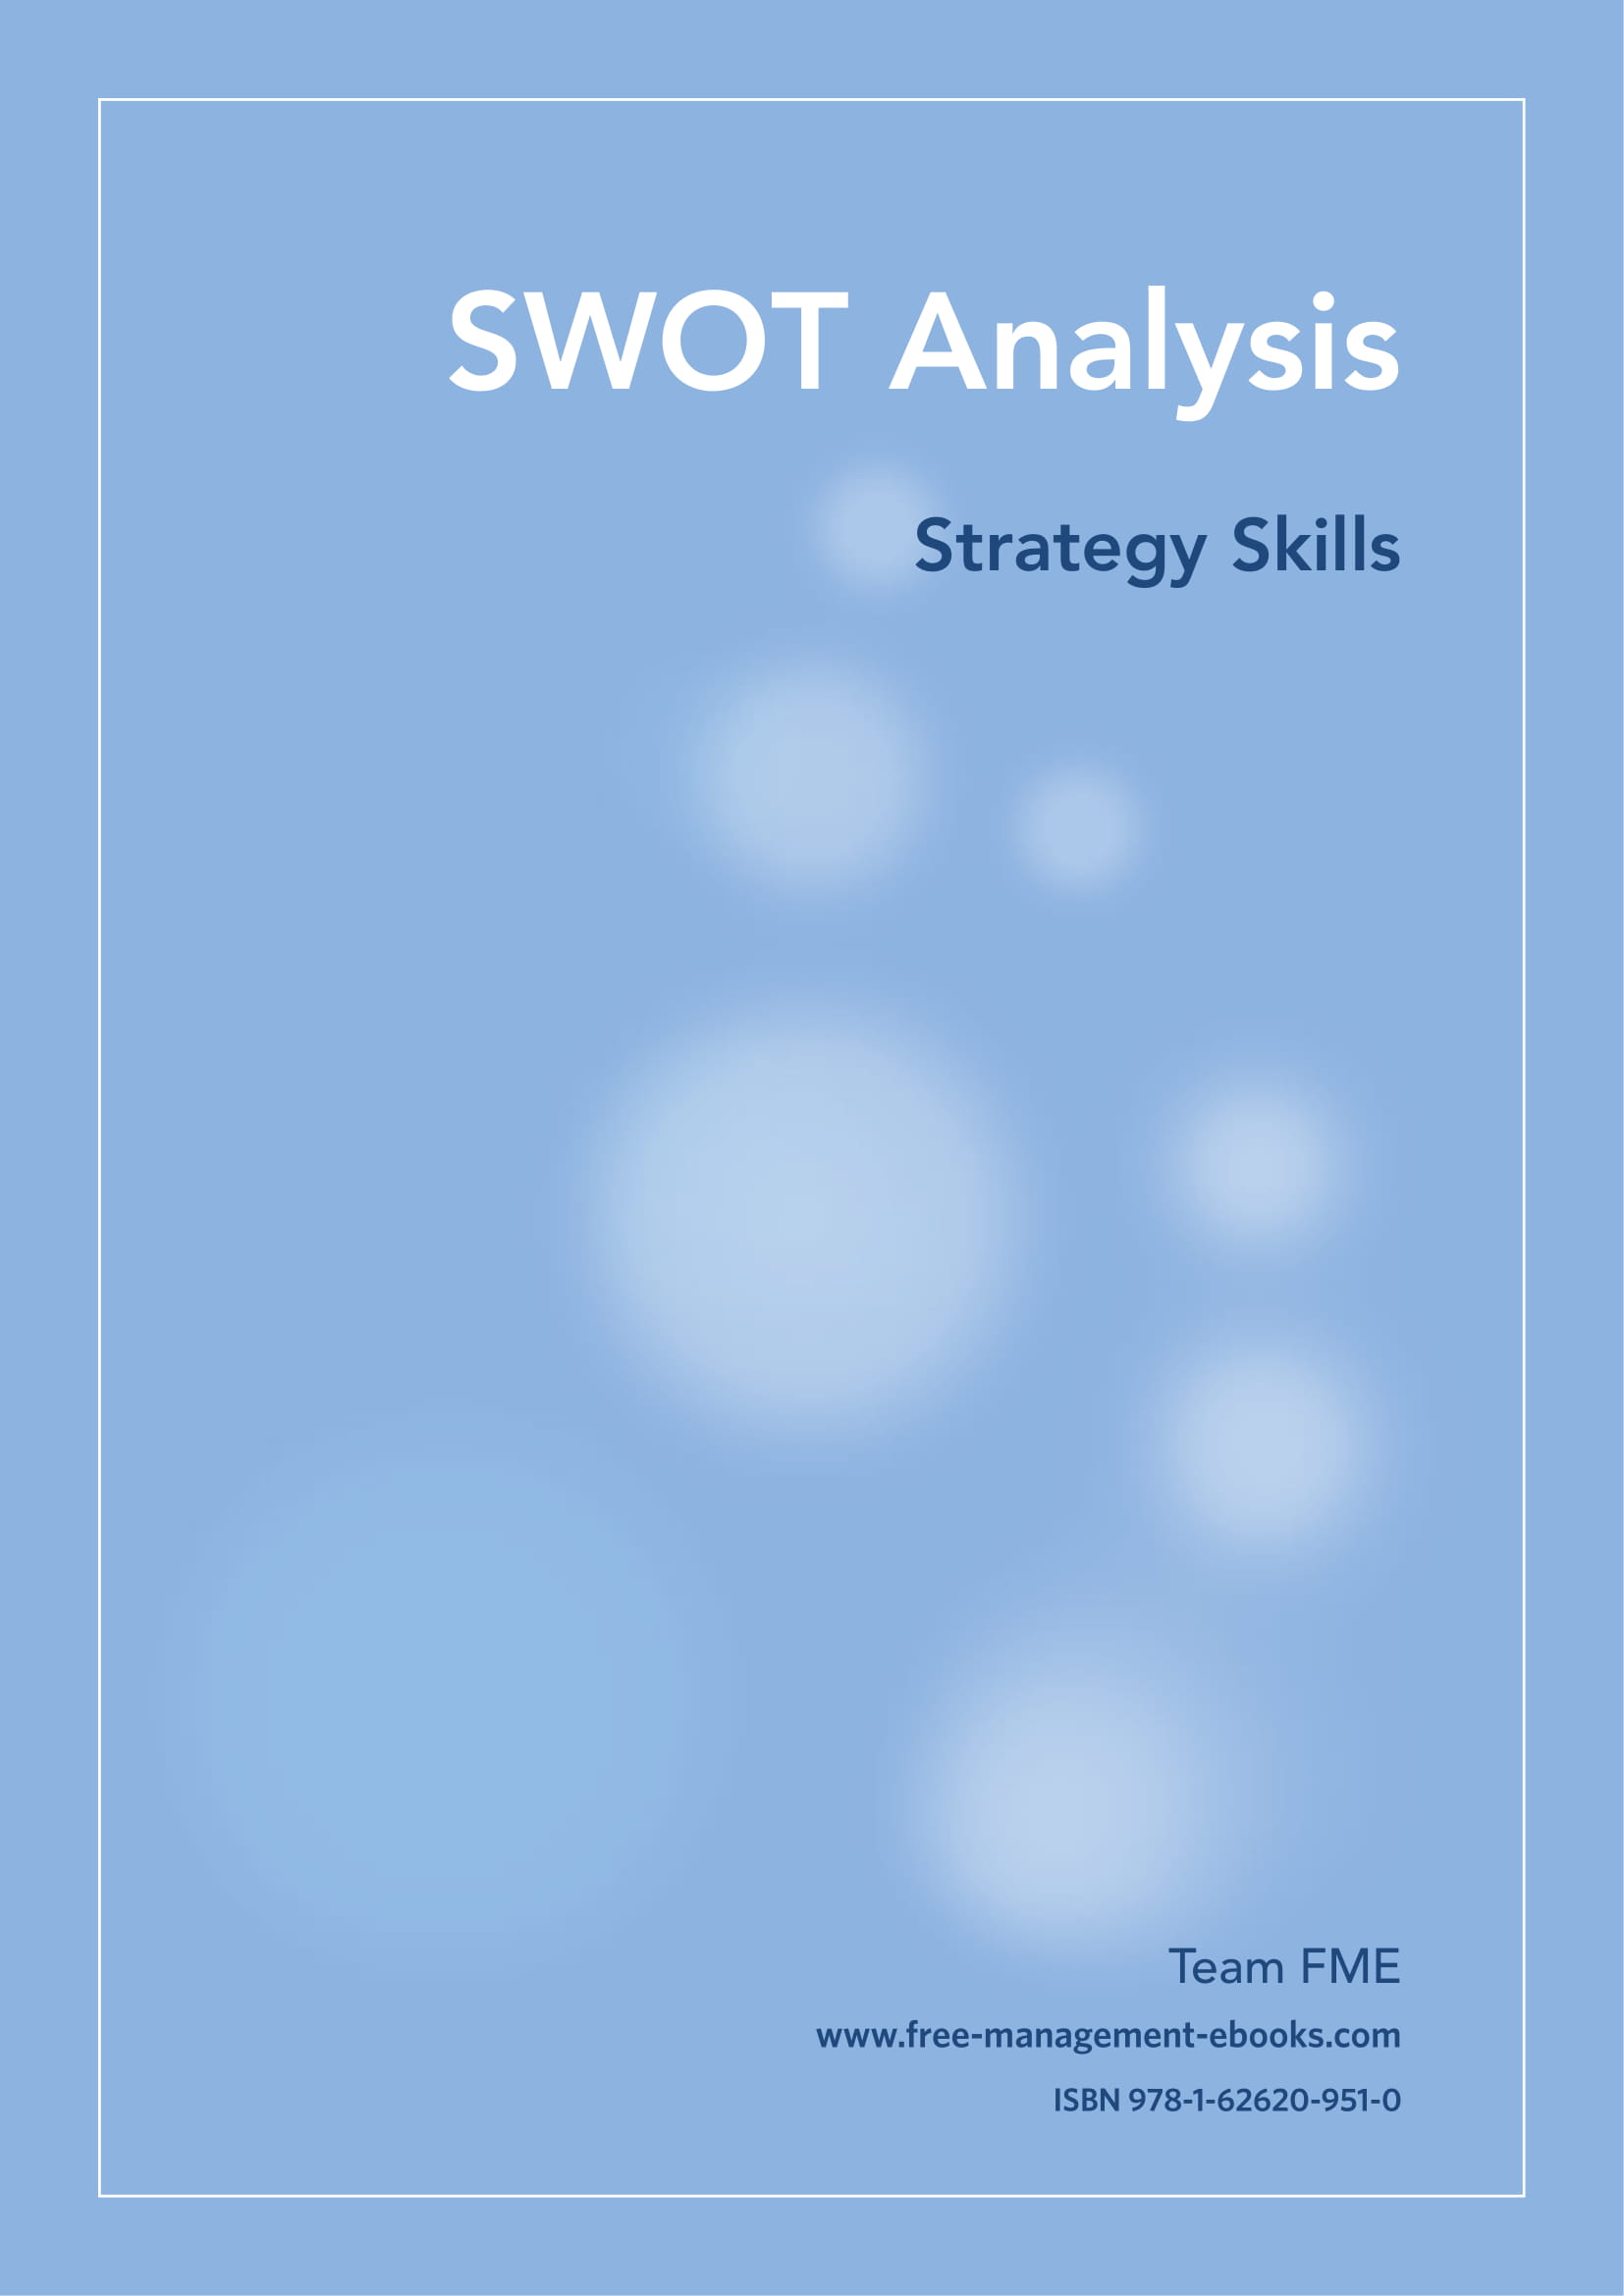 swot analysis chart and guidelines example 01